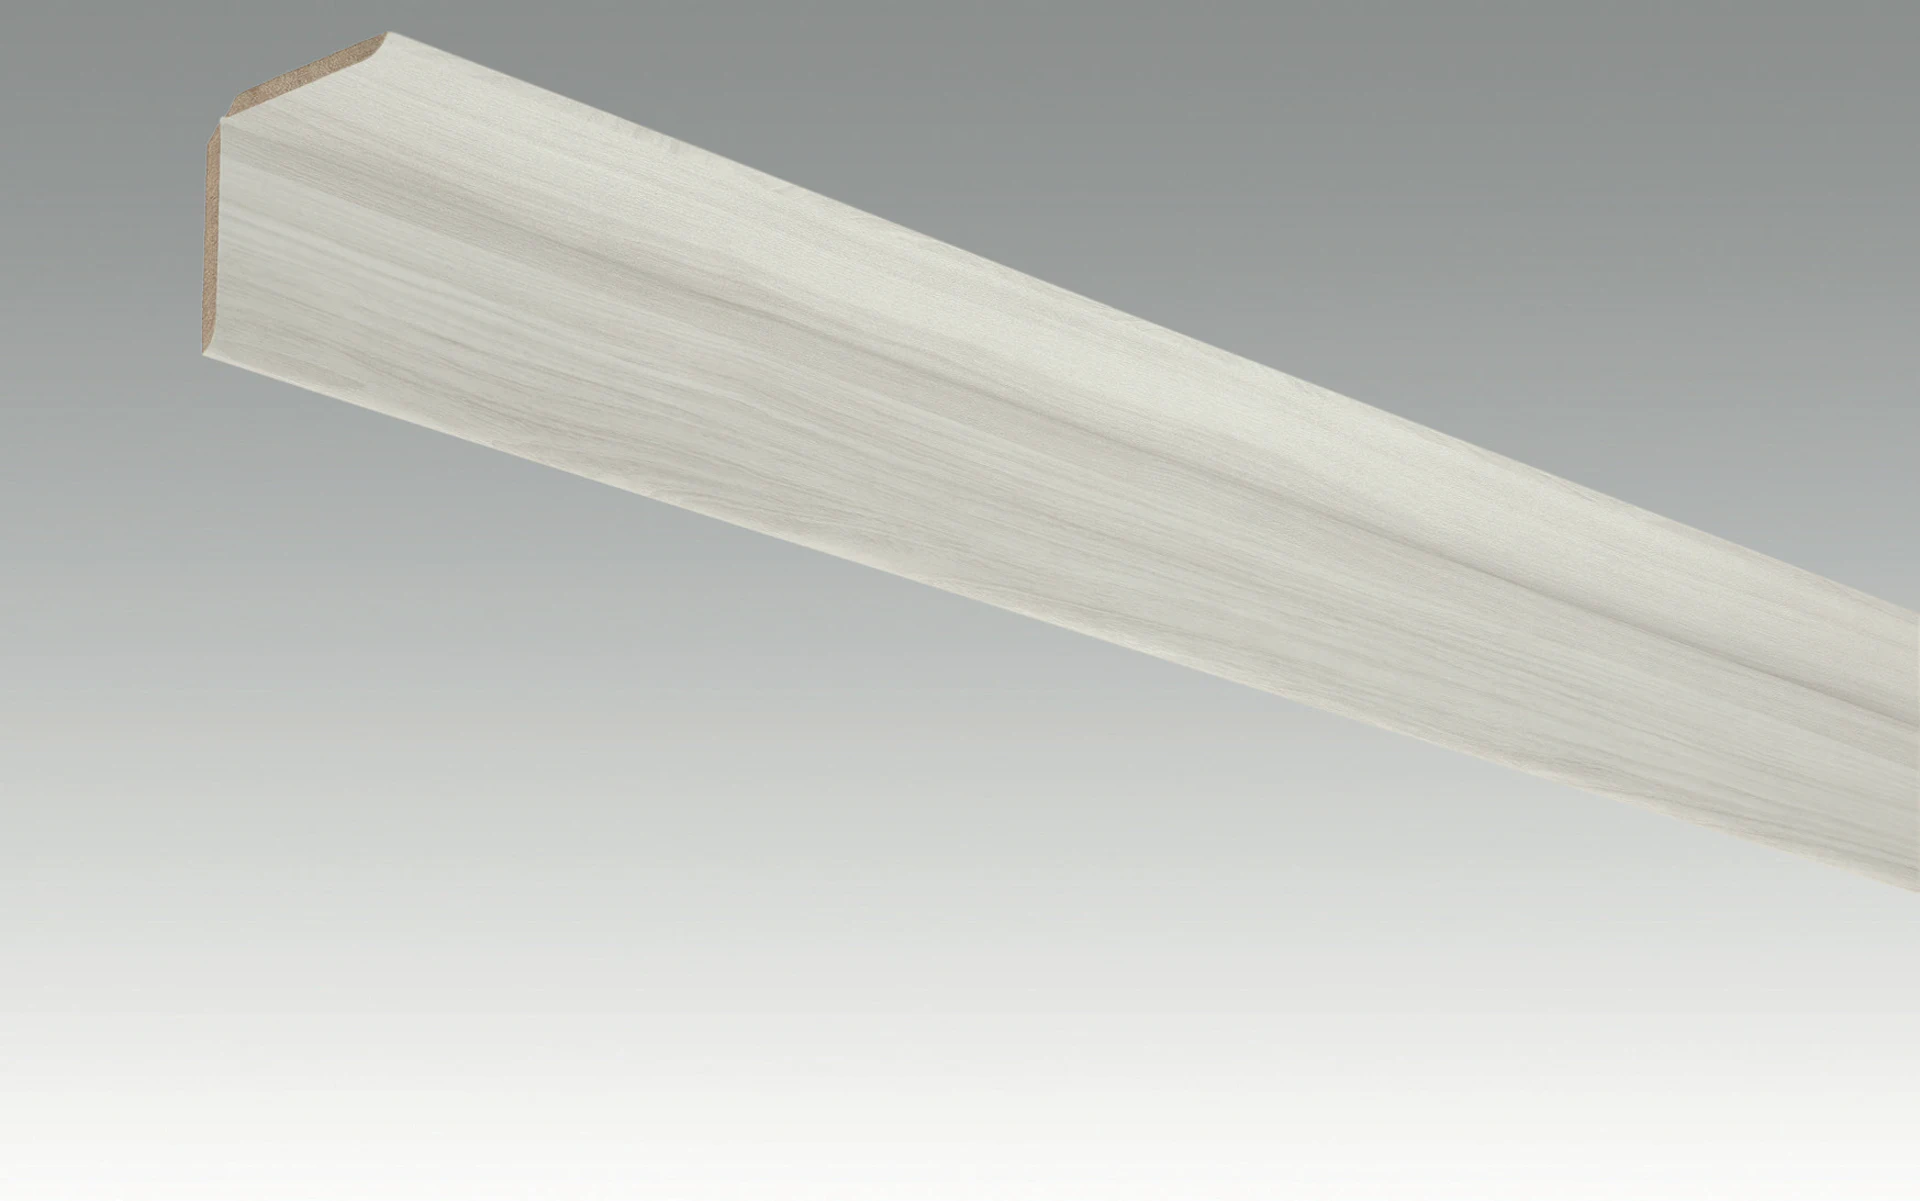 MEISTER Skirting Boards Pleated Grey Ash 4097 - 2380 x 70 x 3.5 mm (200033-2380-04097)